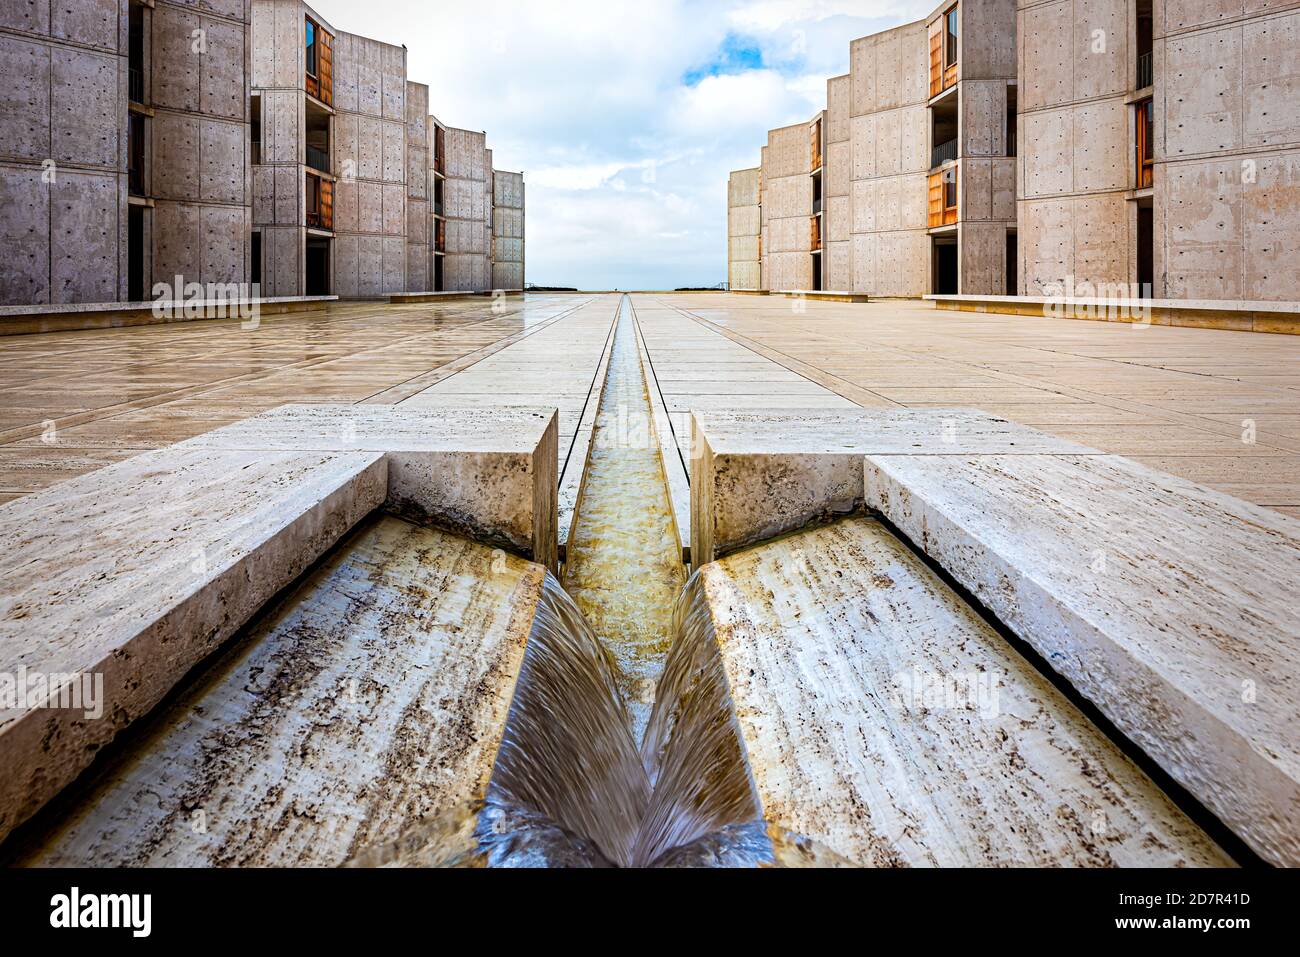 La Jolla, USA - December 10, 2015: Symmetrical architecture building of the Salk Institute in San Diego with fountain vanishing point diminishing pers Stock Photo